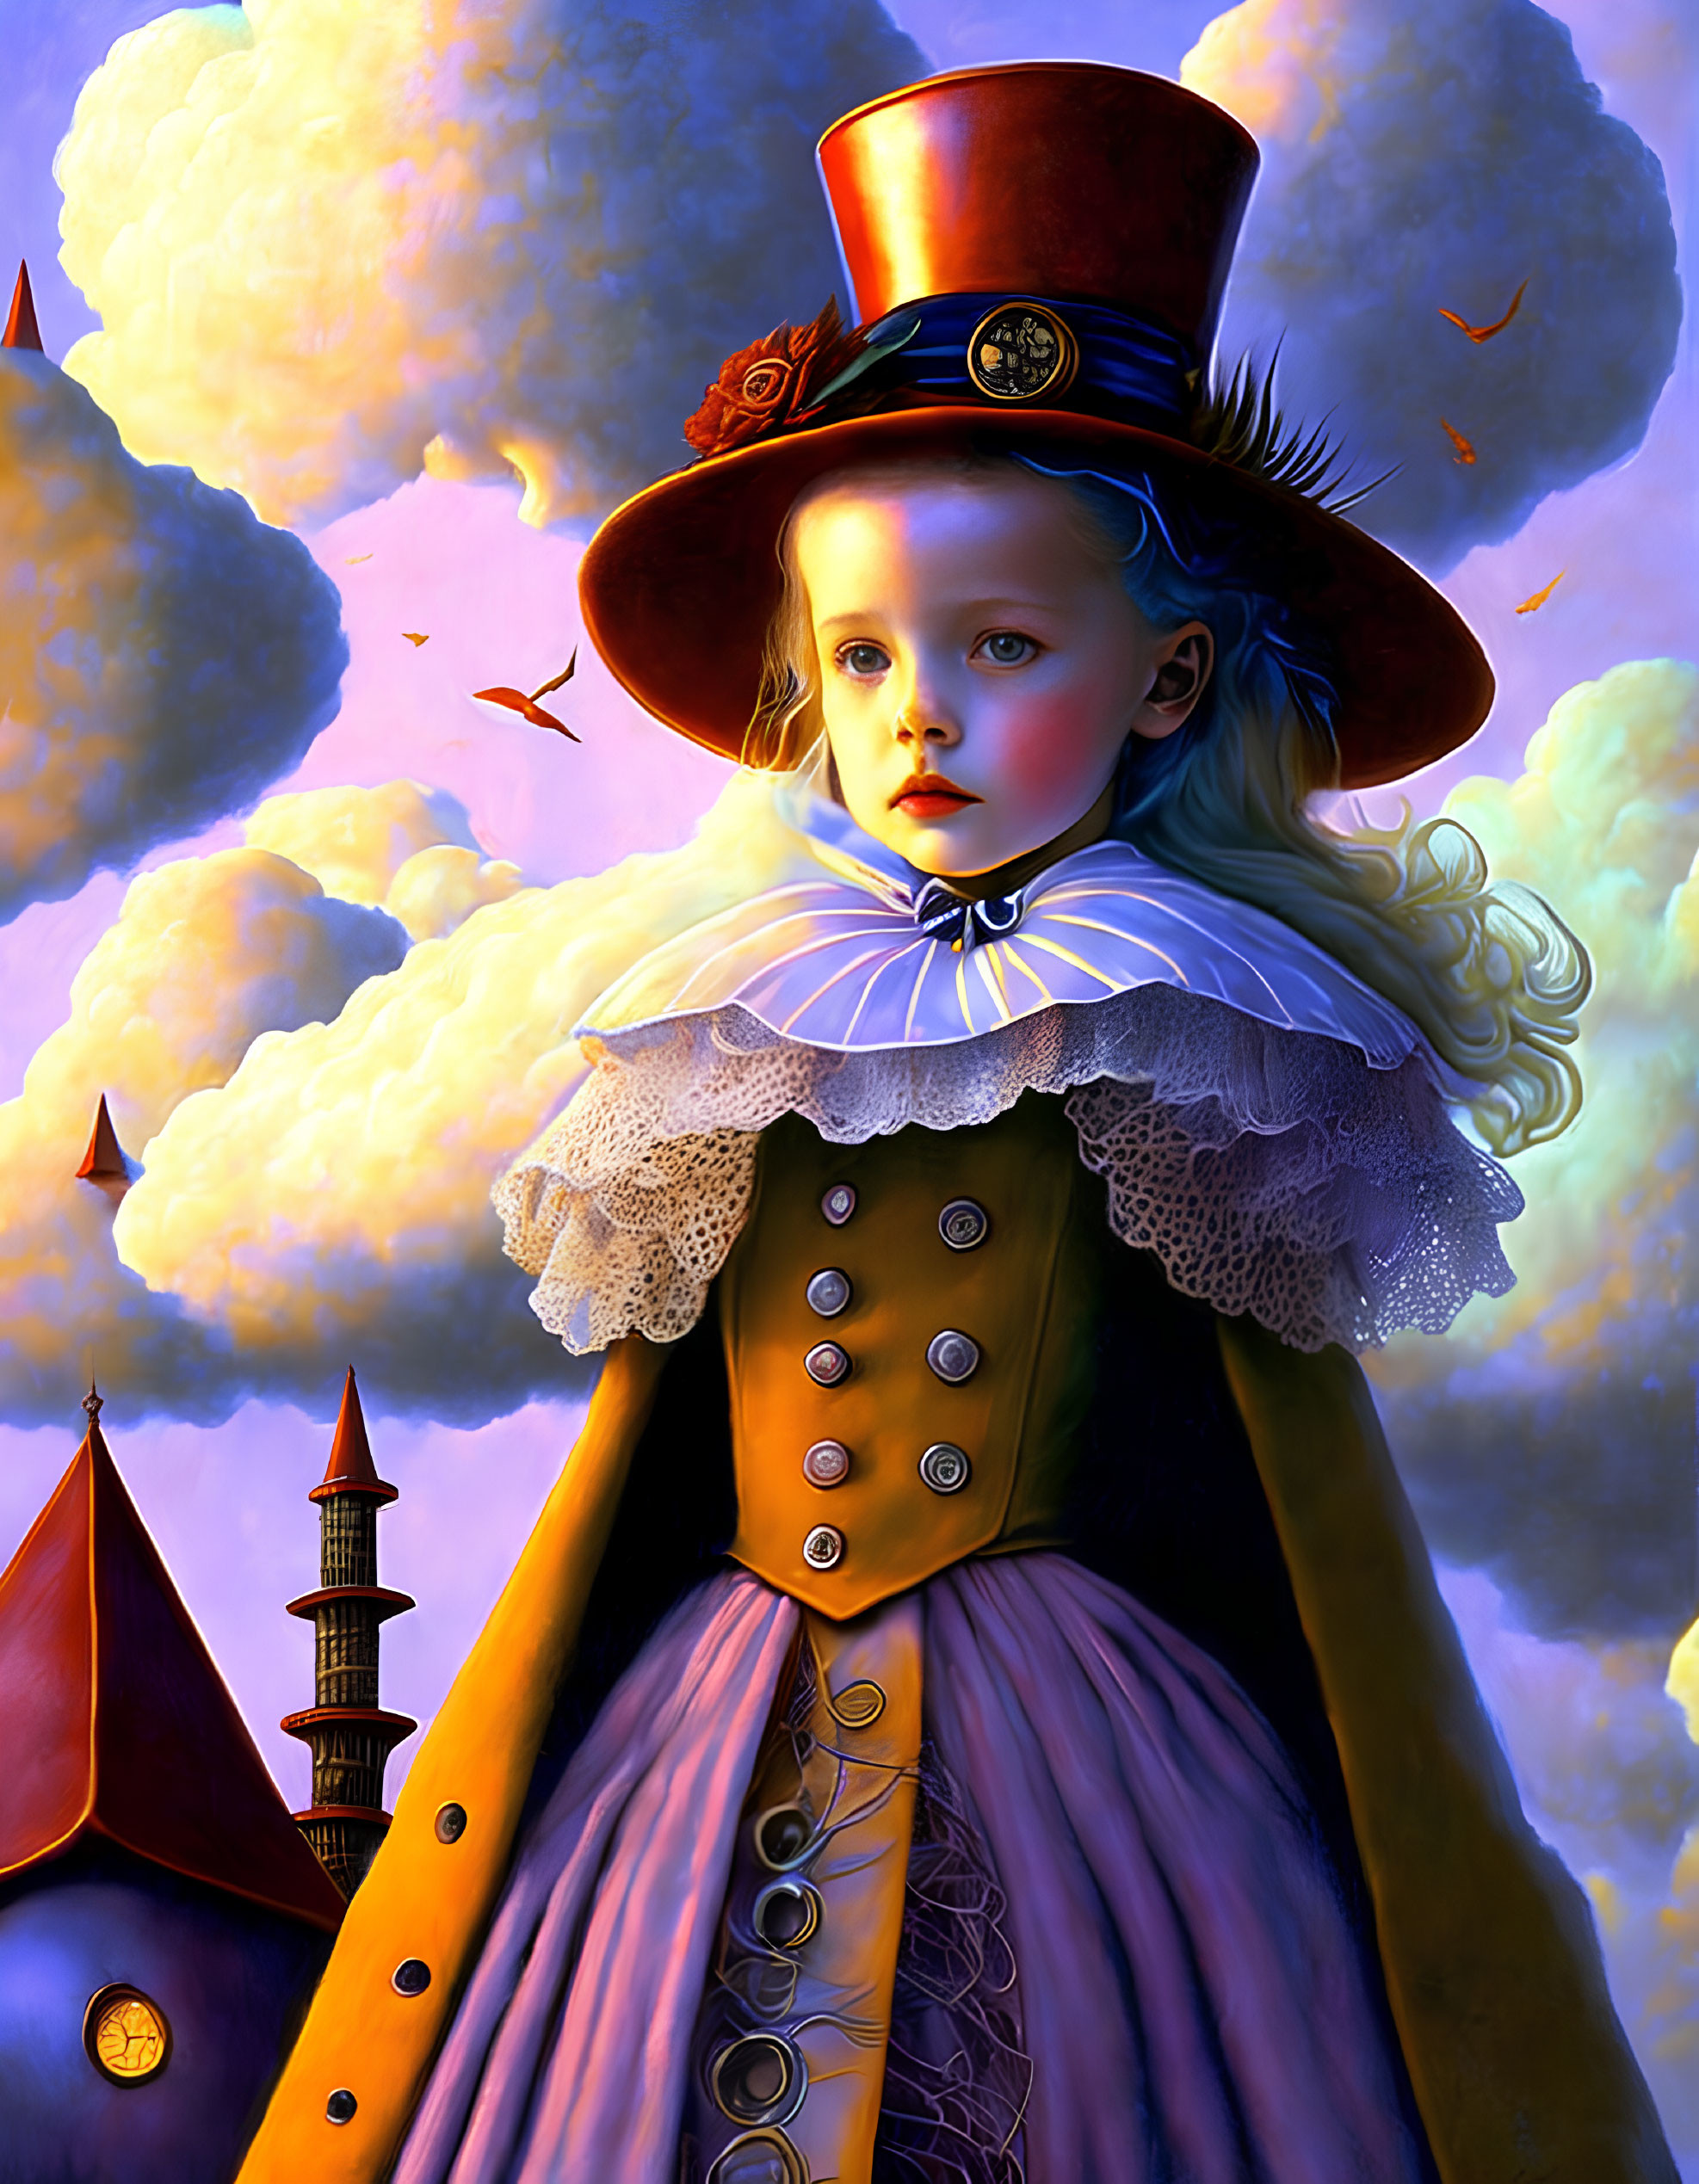 Illustration of solemn Victorian girl in top hat with dreamy backdrop